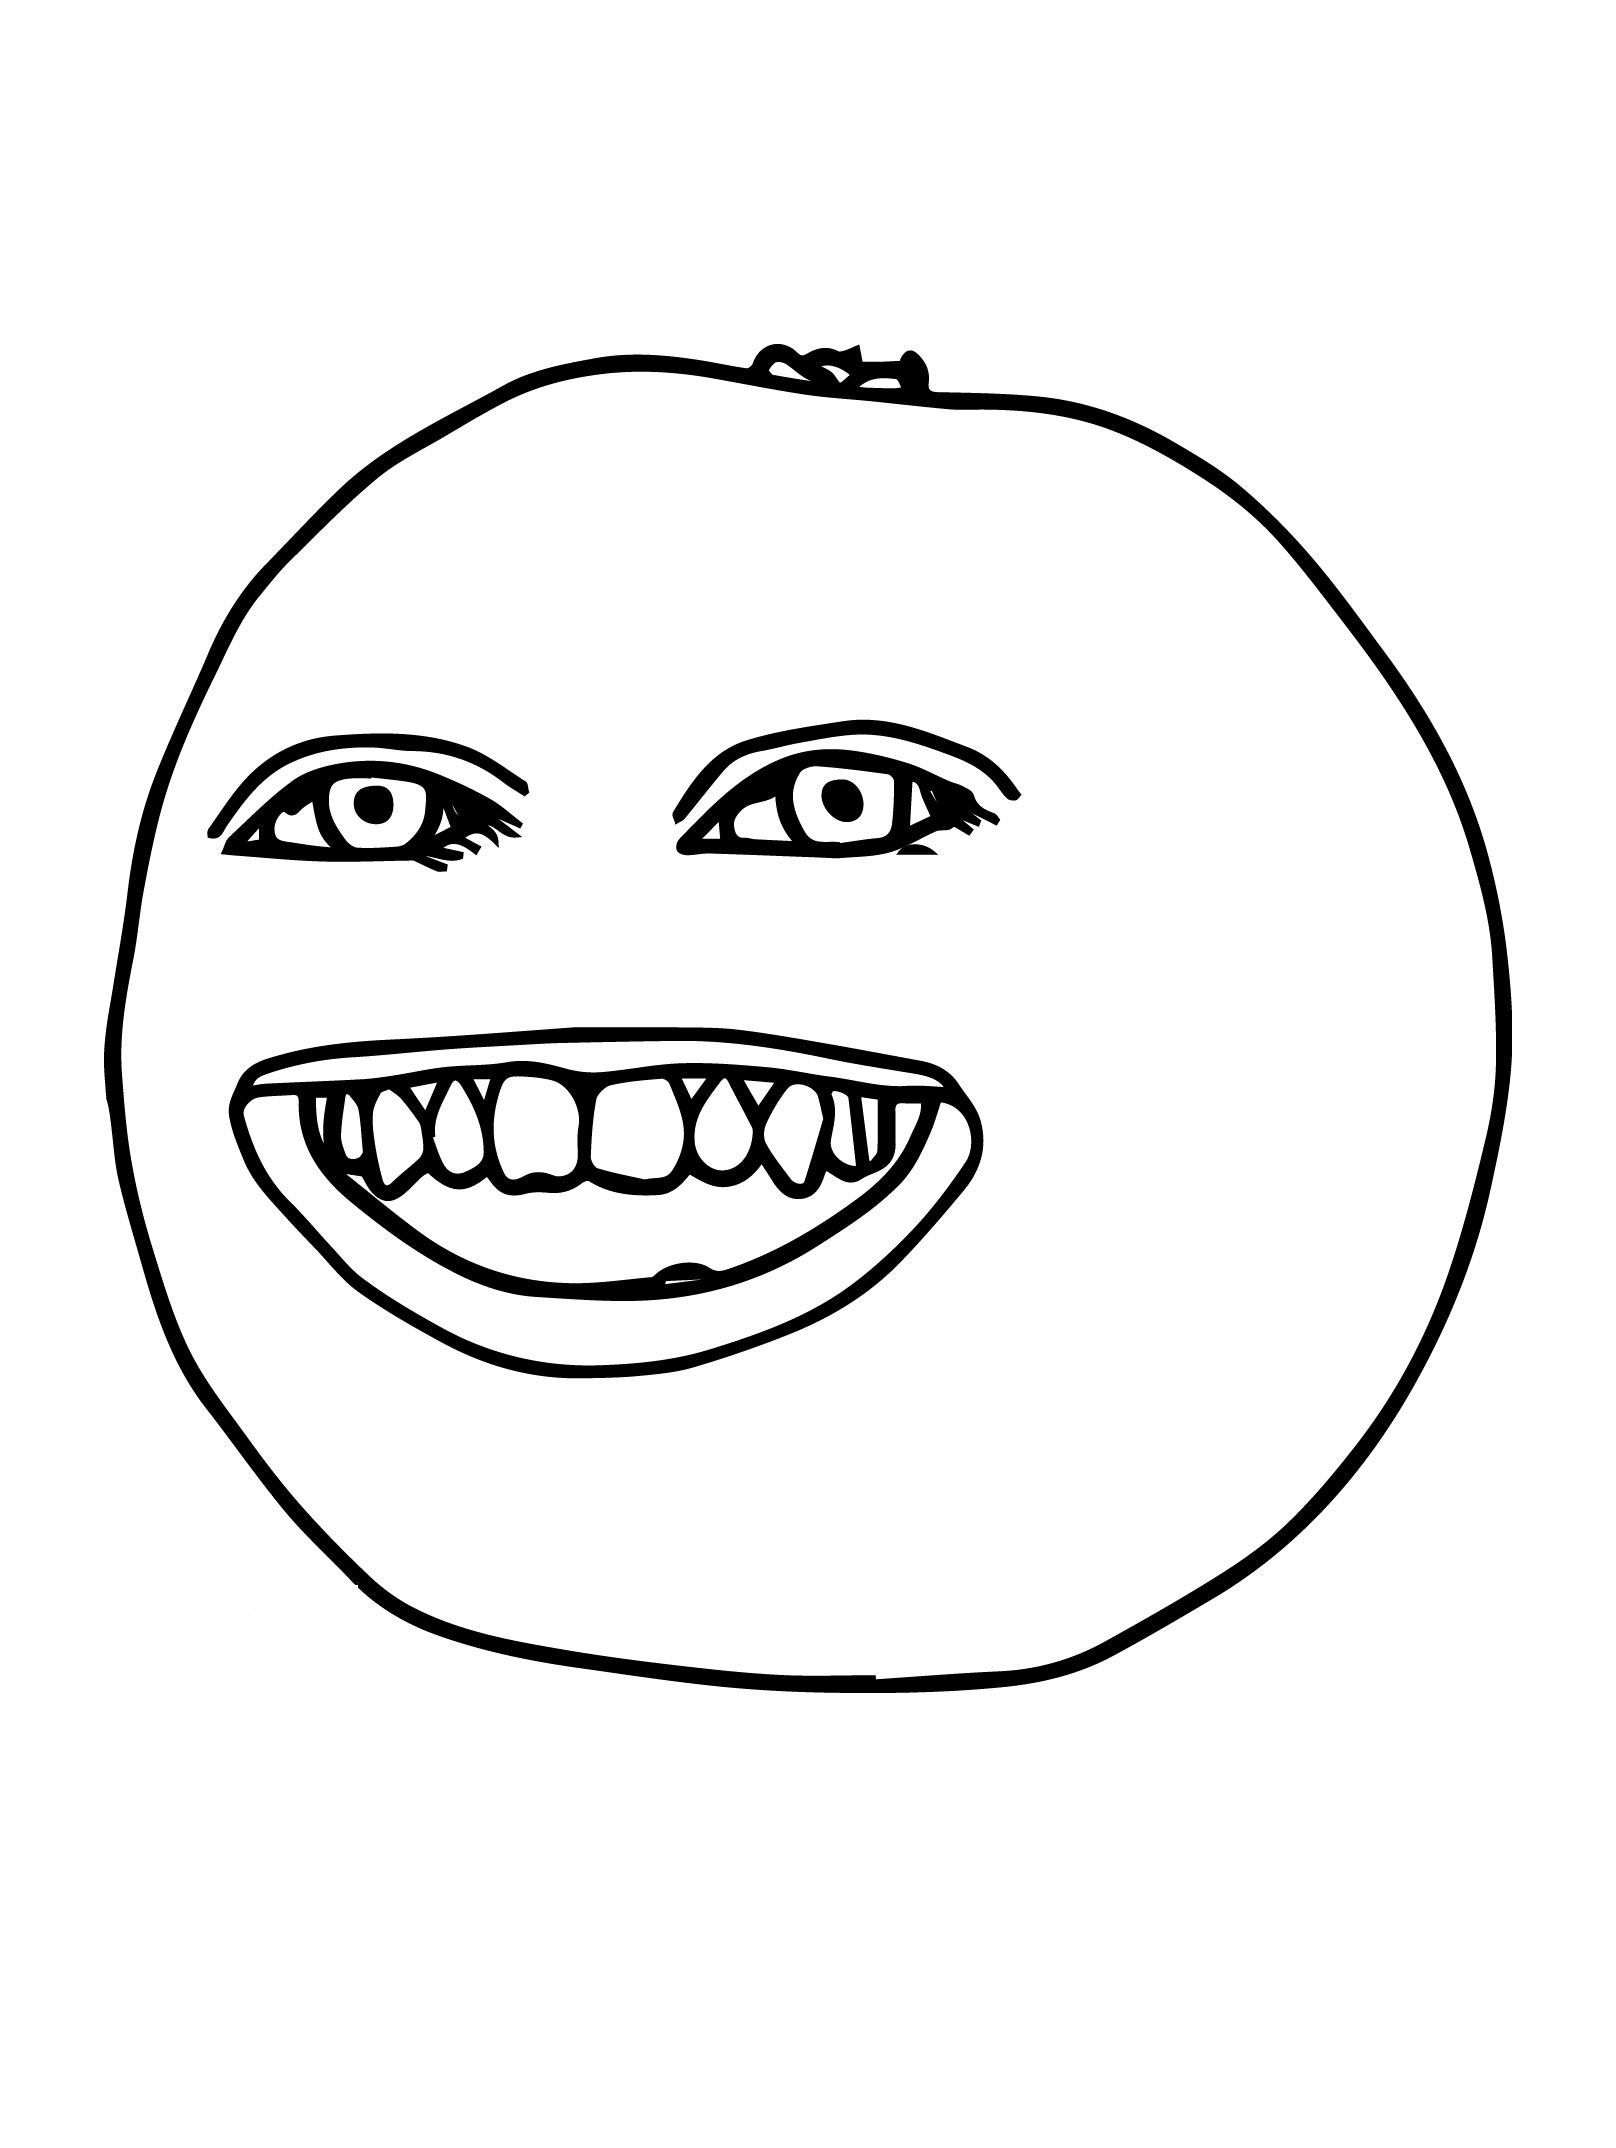 Free Annoying Orange Coloring Pages Pdf - The Annoying Orange Coloring Pages